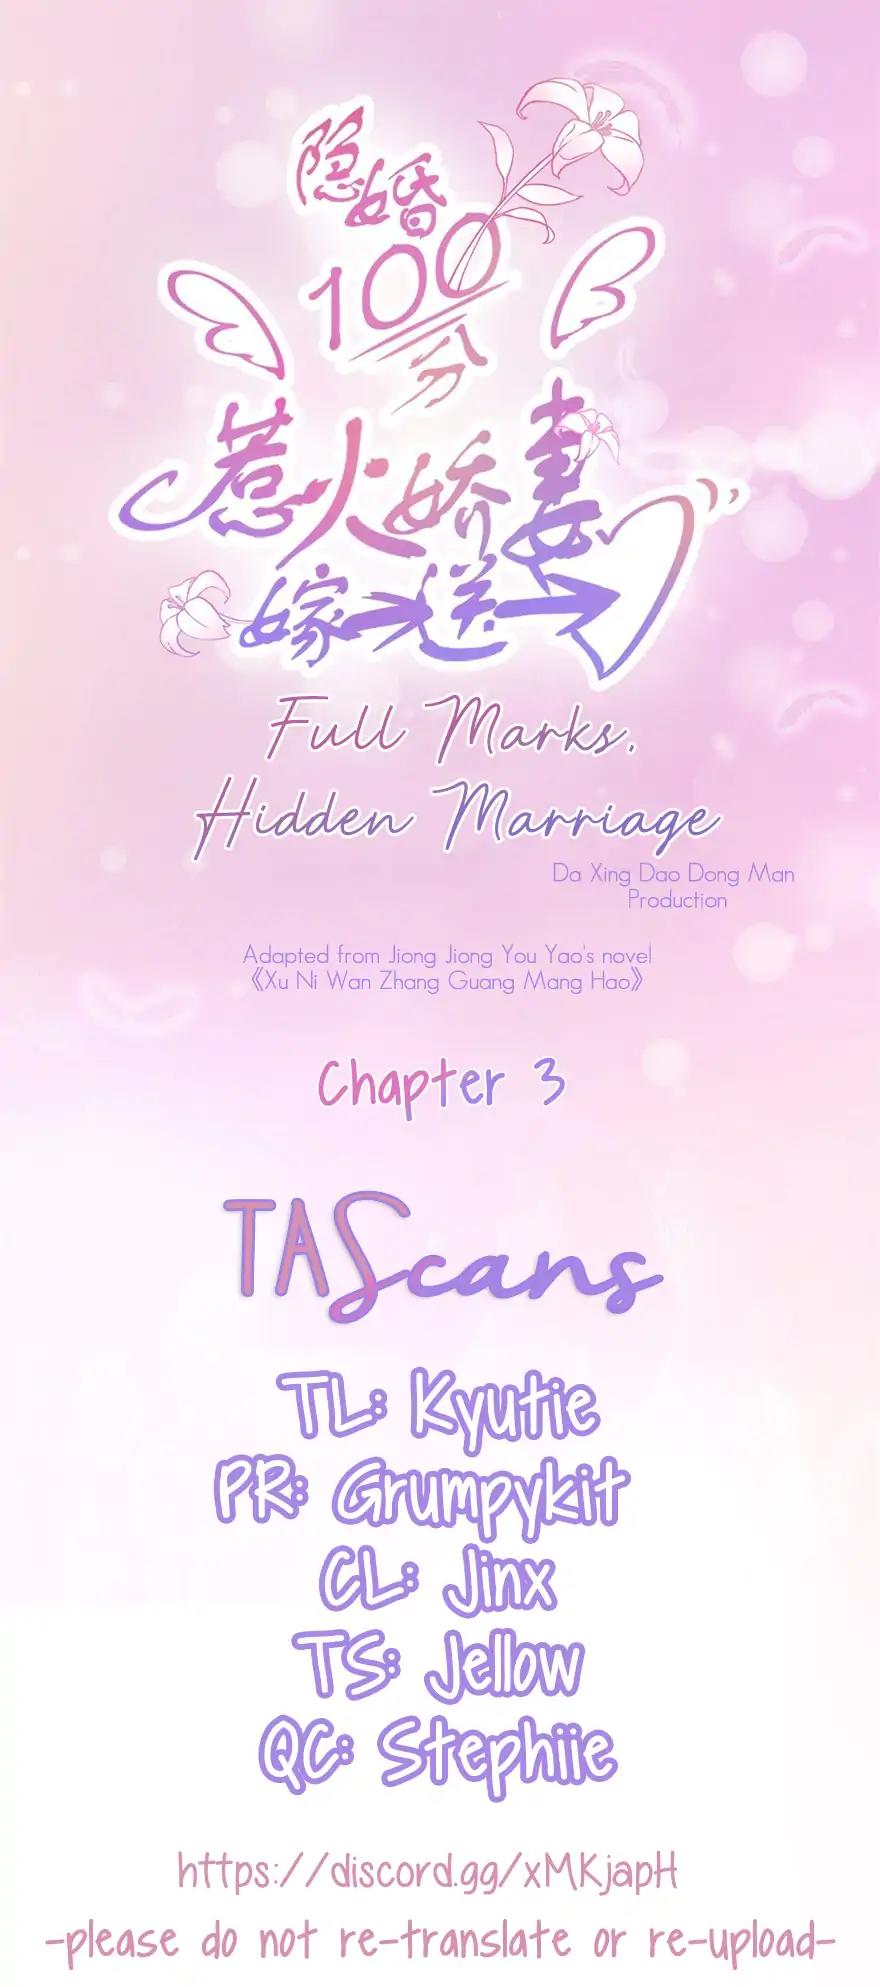 Full Marks, Hidden Marriage Chapter 3: